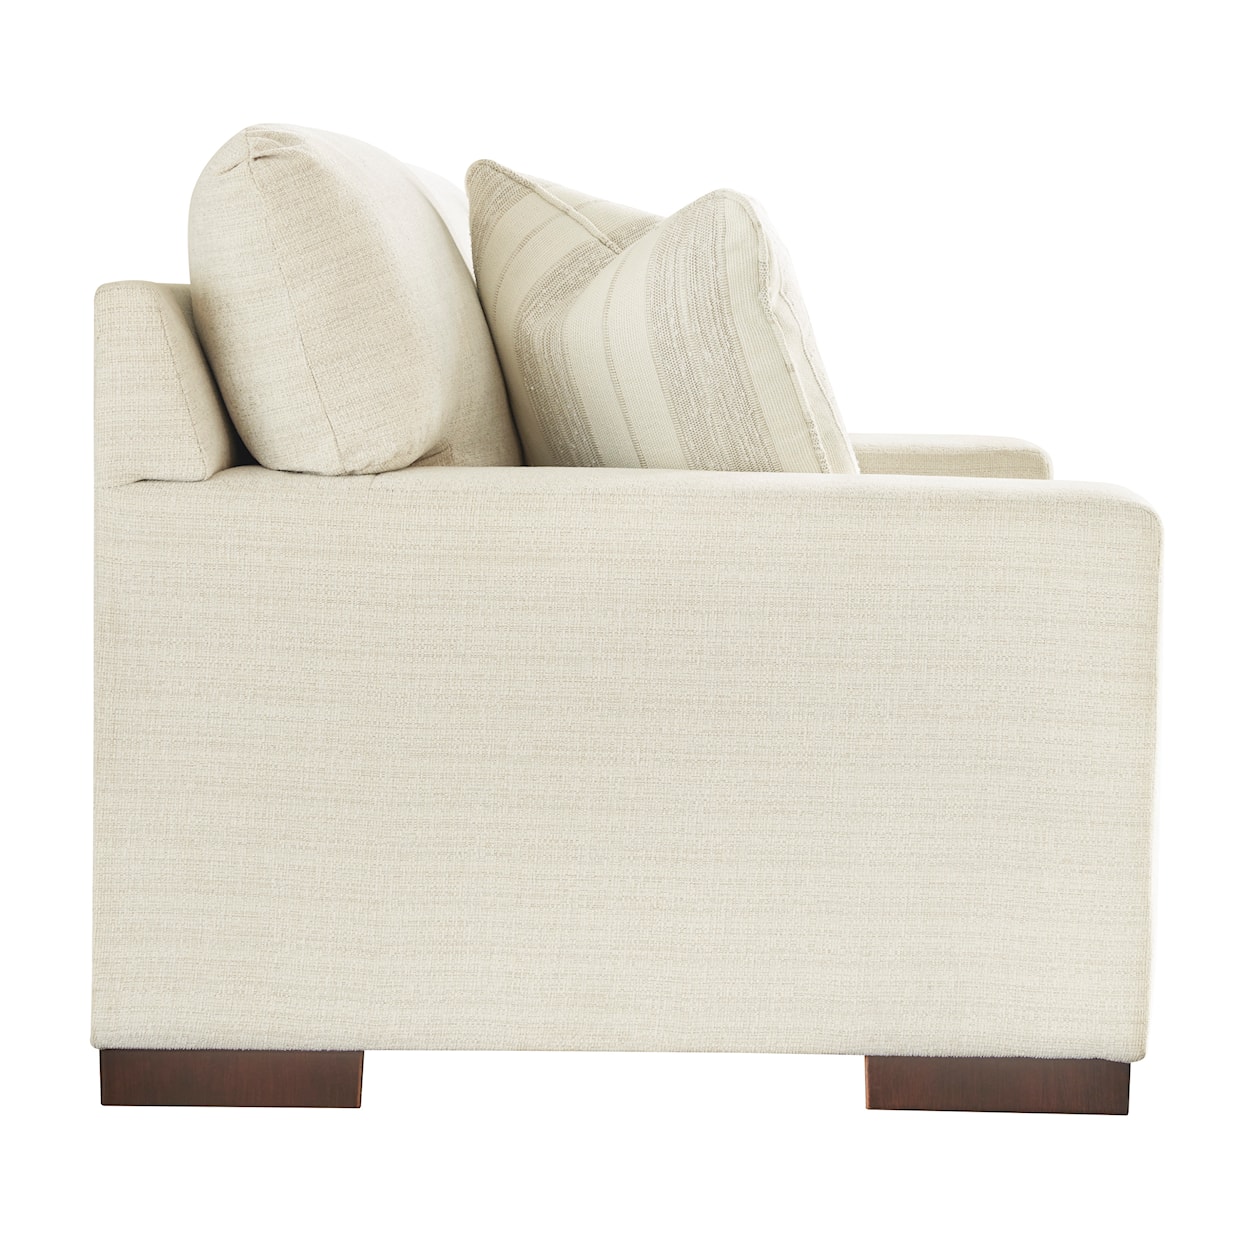 Signature Design by Ashley Maggie Loveseat